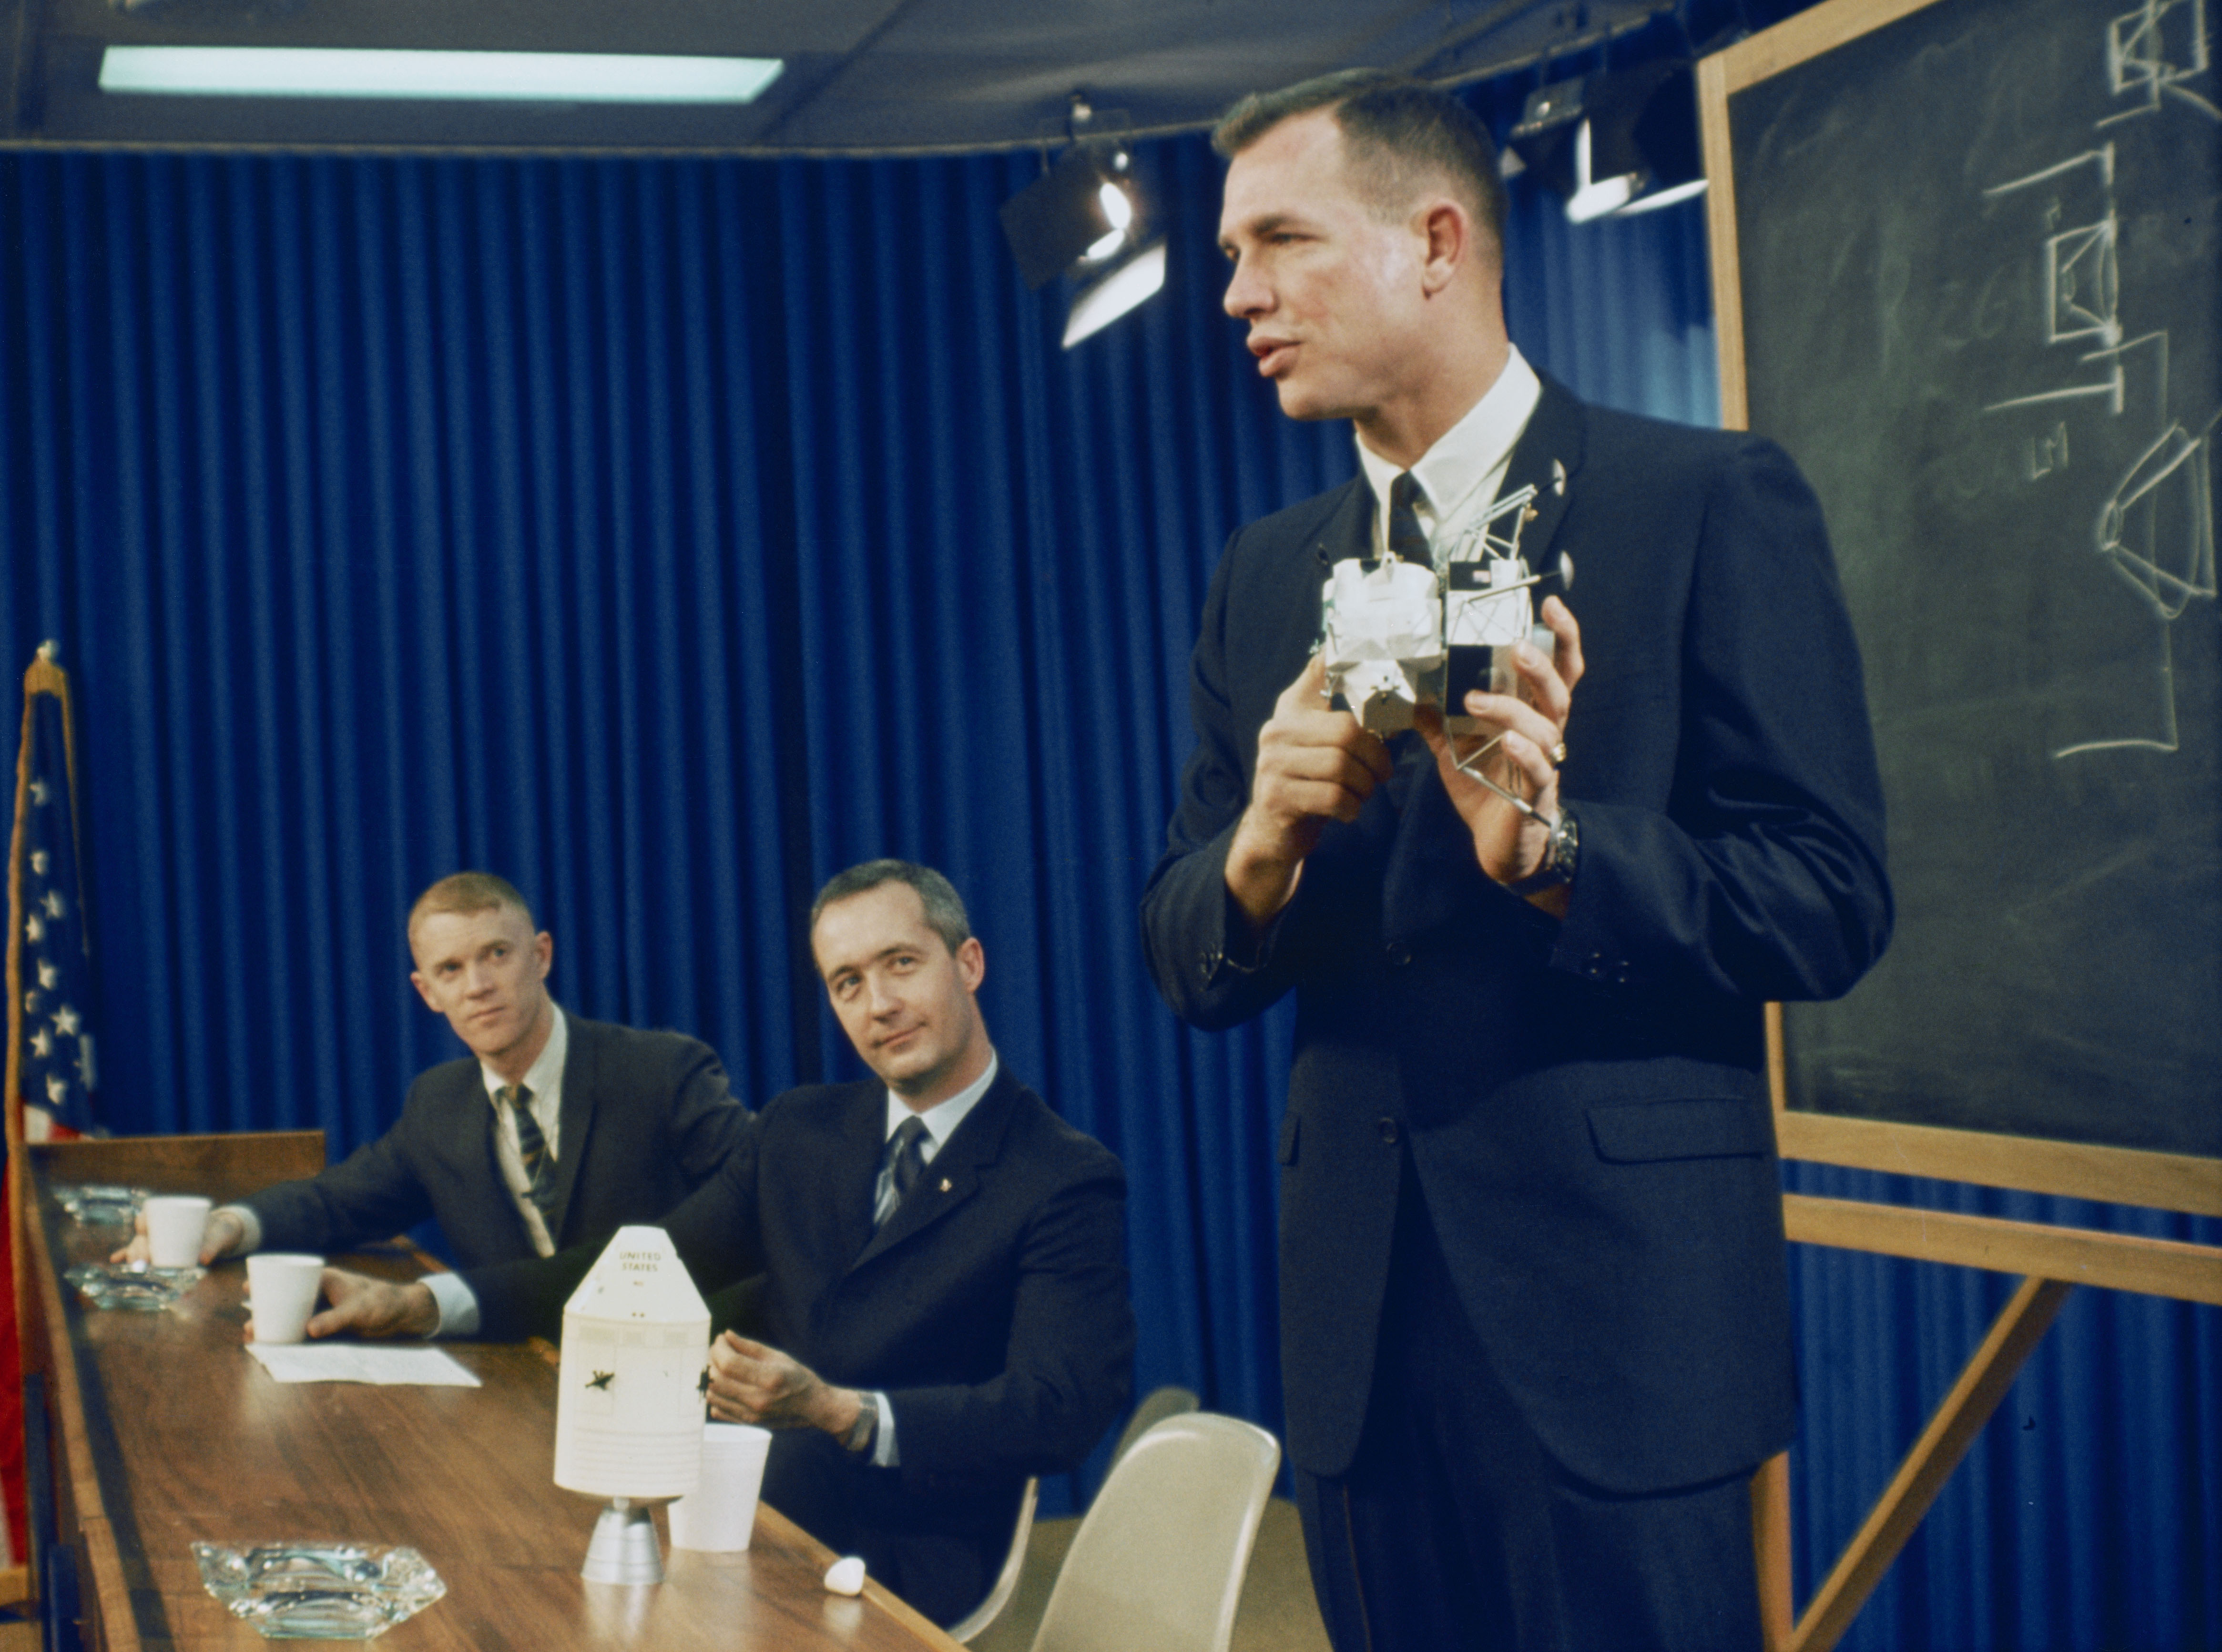 Apollo 9 astronauts Russell L. Schweickart, left, James A. McDivitt, and David R. Scott during the preflight crew press conference at the Manned Spacecraft Center (MSC), now NASA's Johnson Space Center in Houston